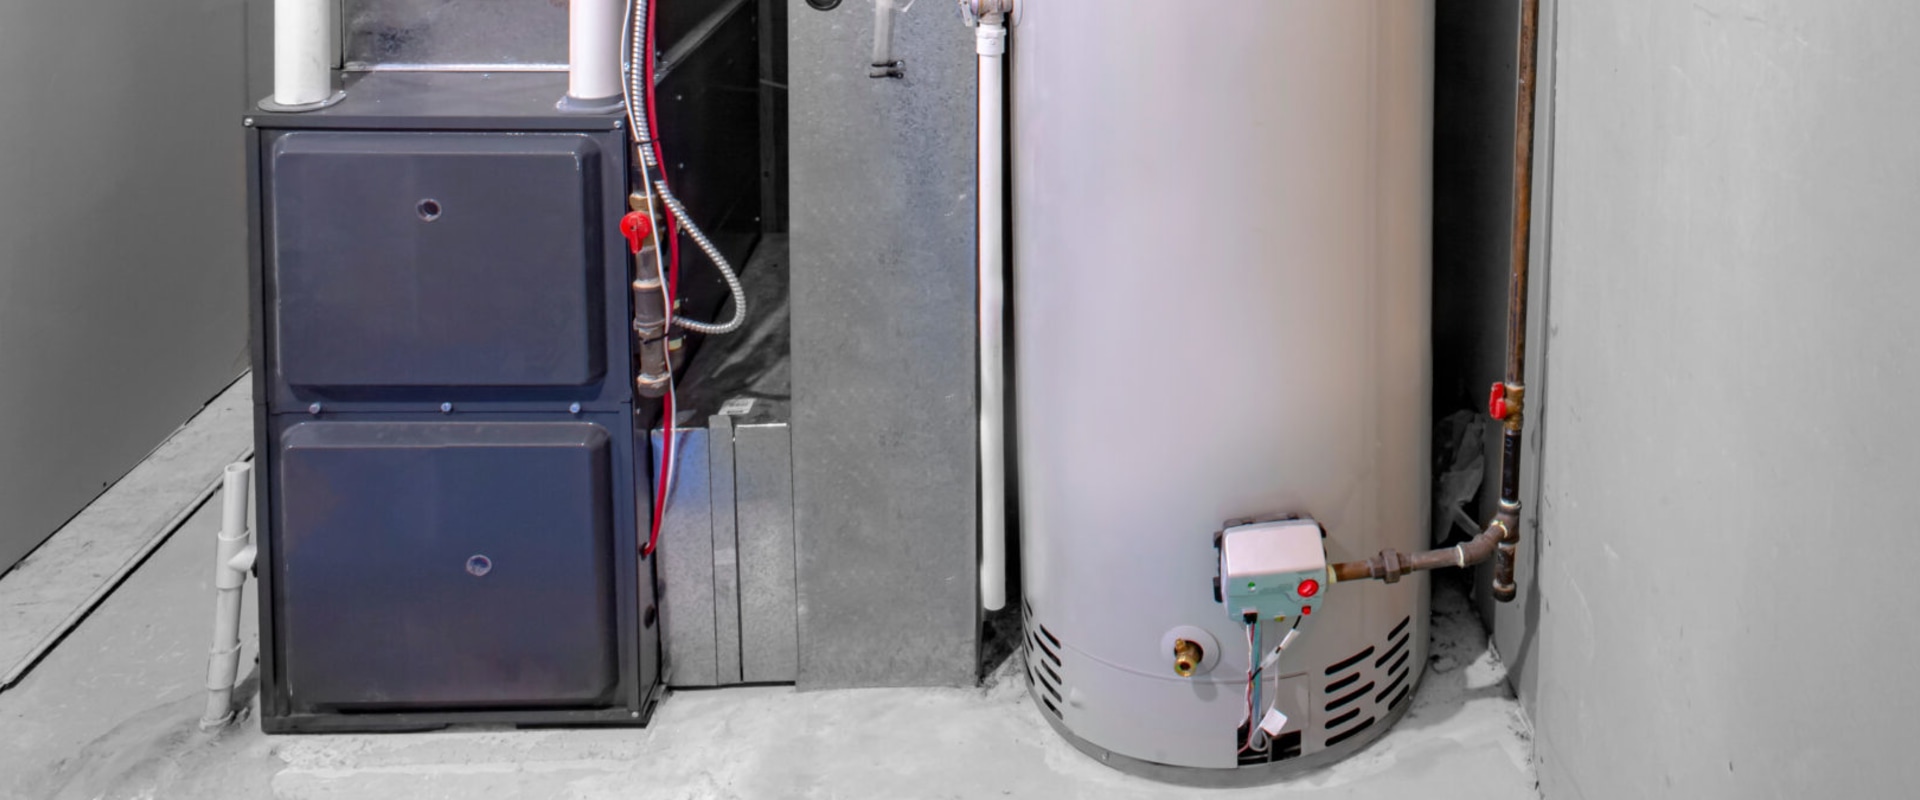 The Lifespan of a Water Heater: How Long Can You Expect It to Last?